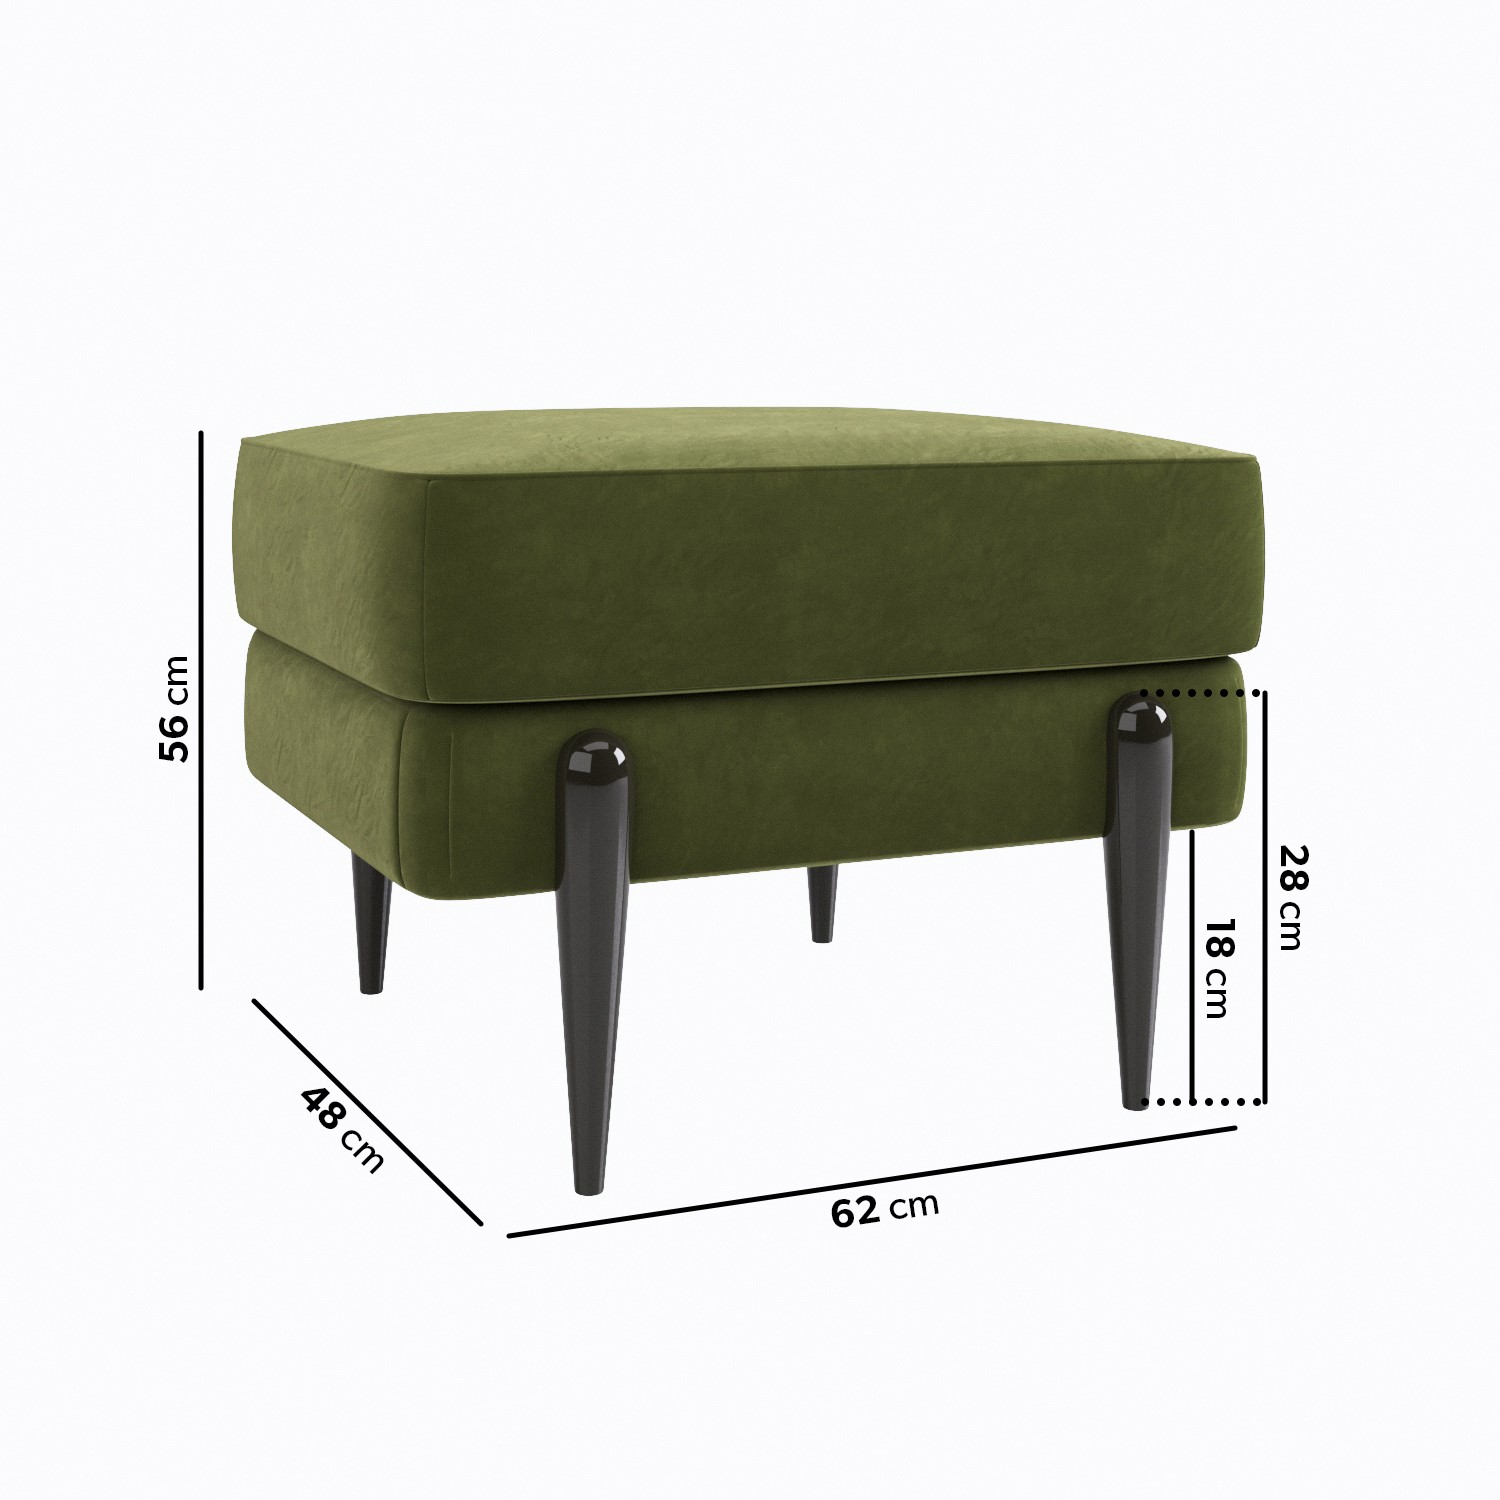 Read more about Small olive green velvet footstool rosie